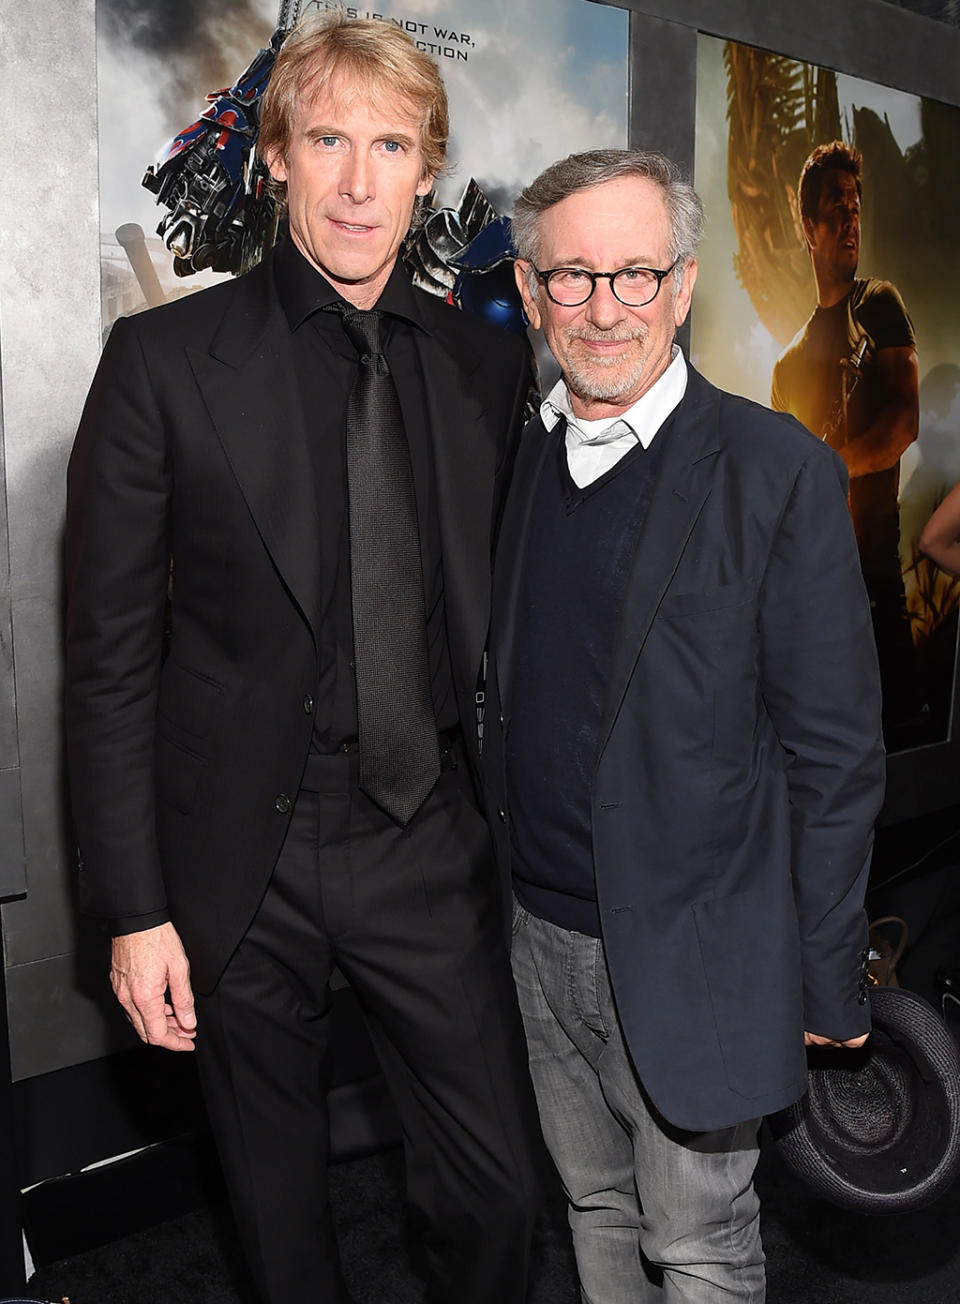 <p>Bay and executive producer Spielberg attend the <em>Age of Extinction</em> premiere. (Photo: Larry Busacca/Getty Images) </p>